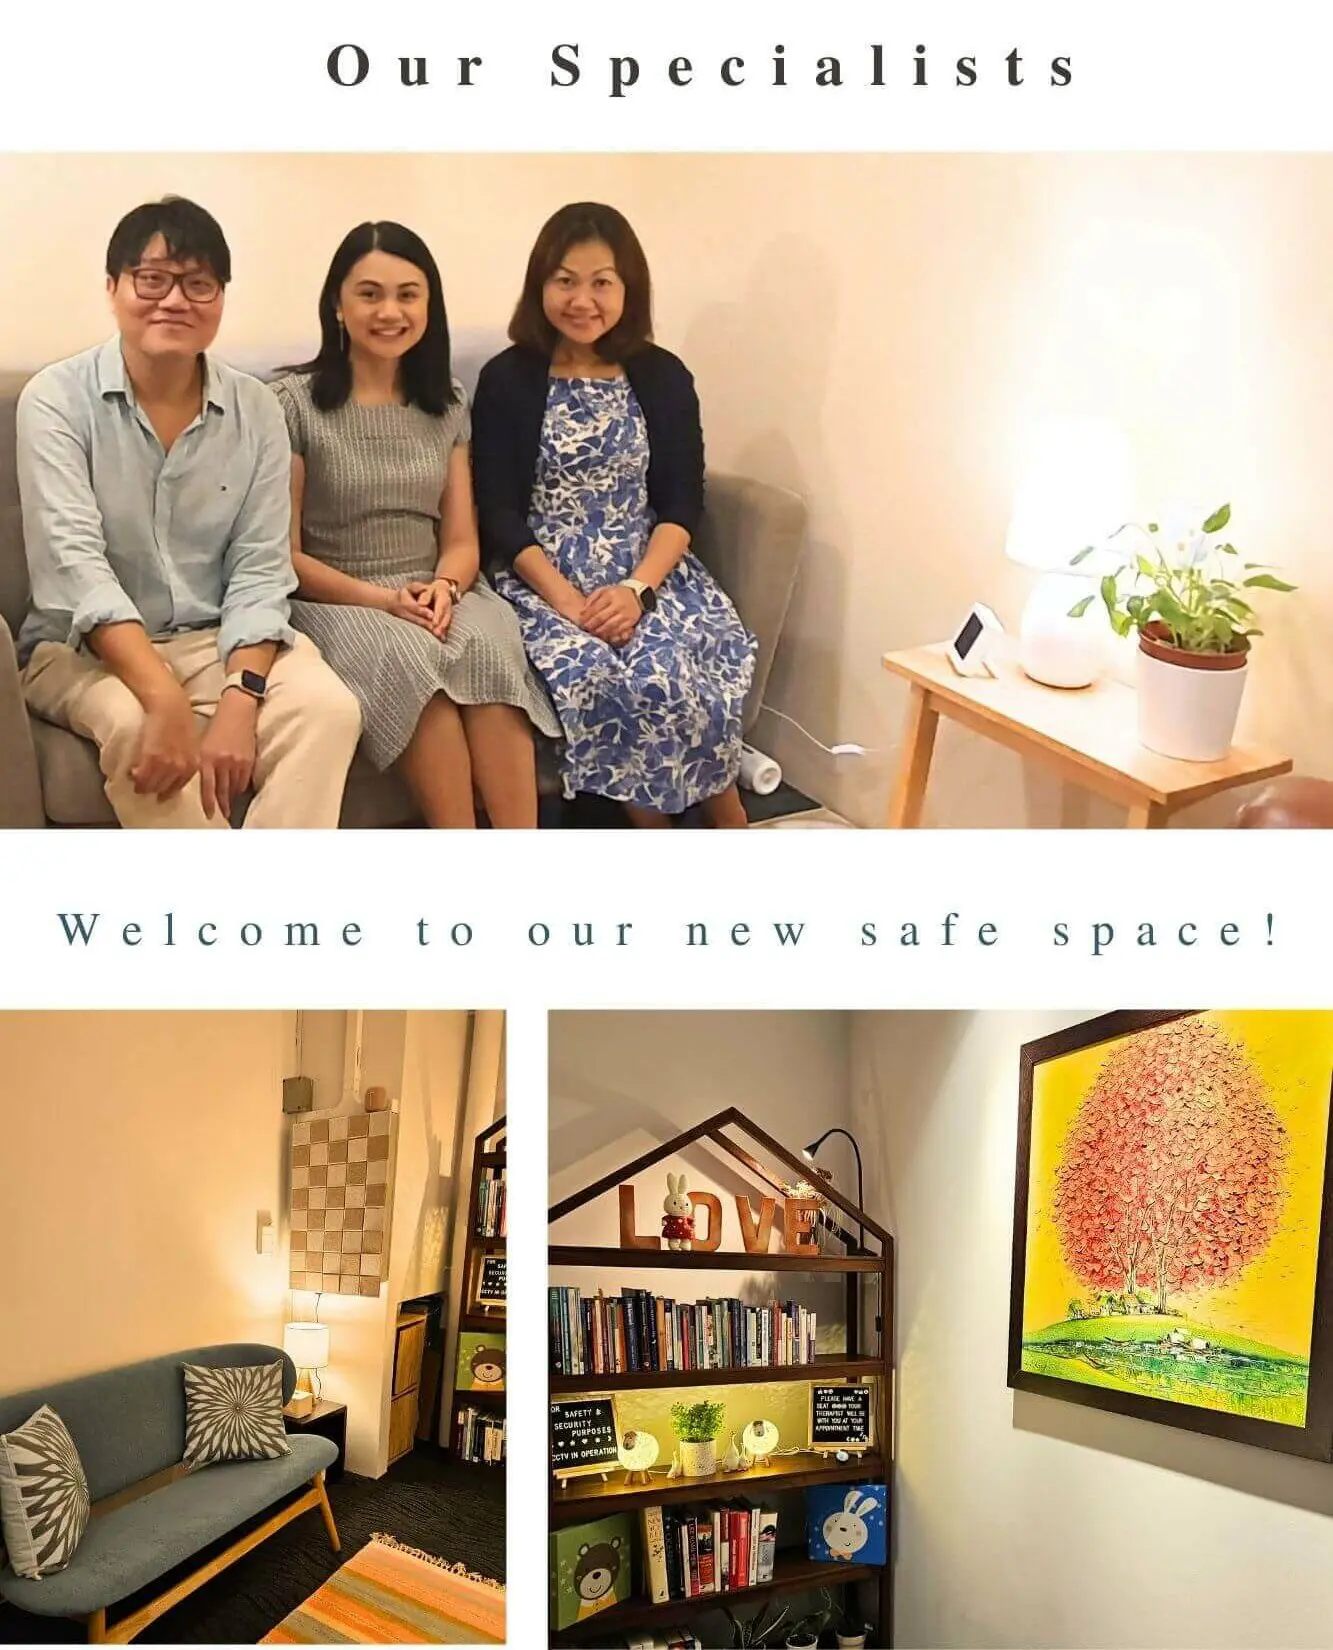 Awaken Counselling Centre safe space photo with Therapists Michael, Fion and Valerie